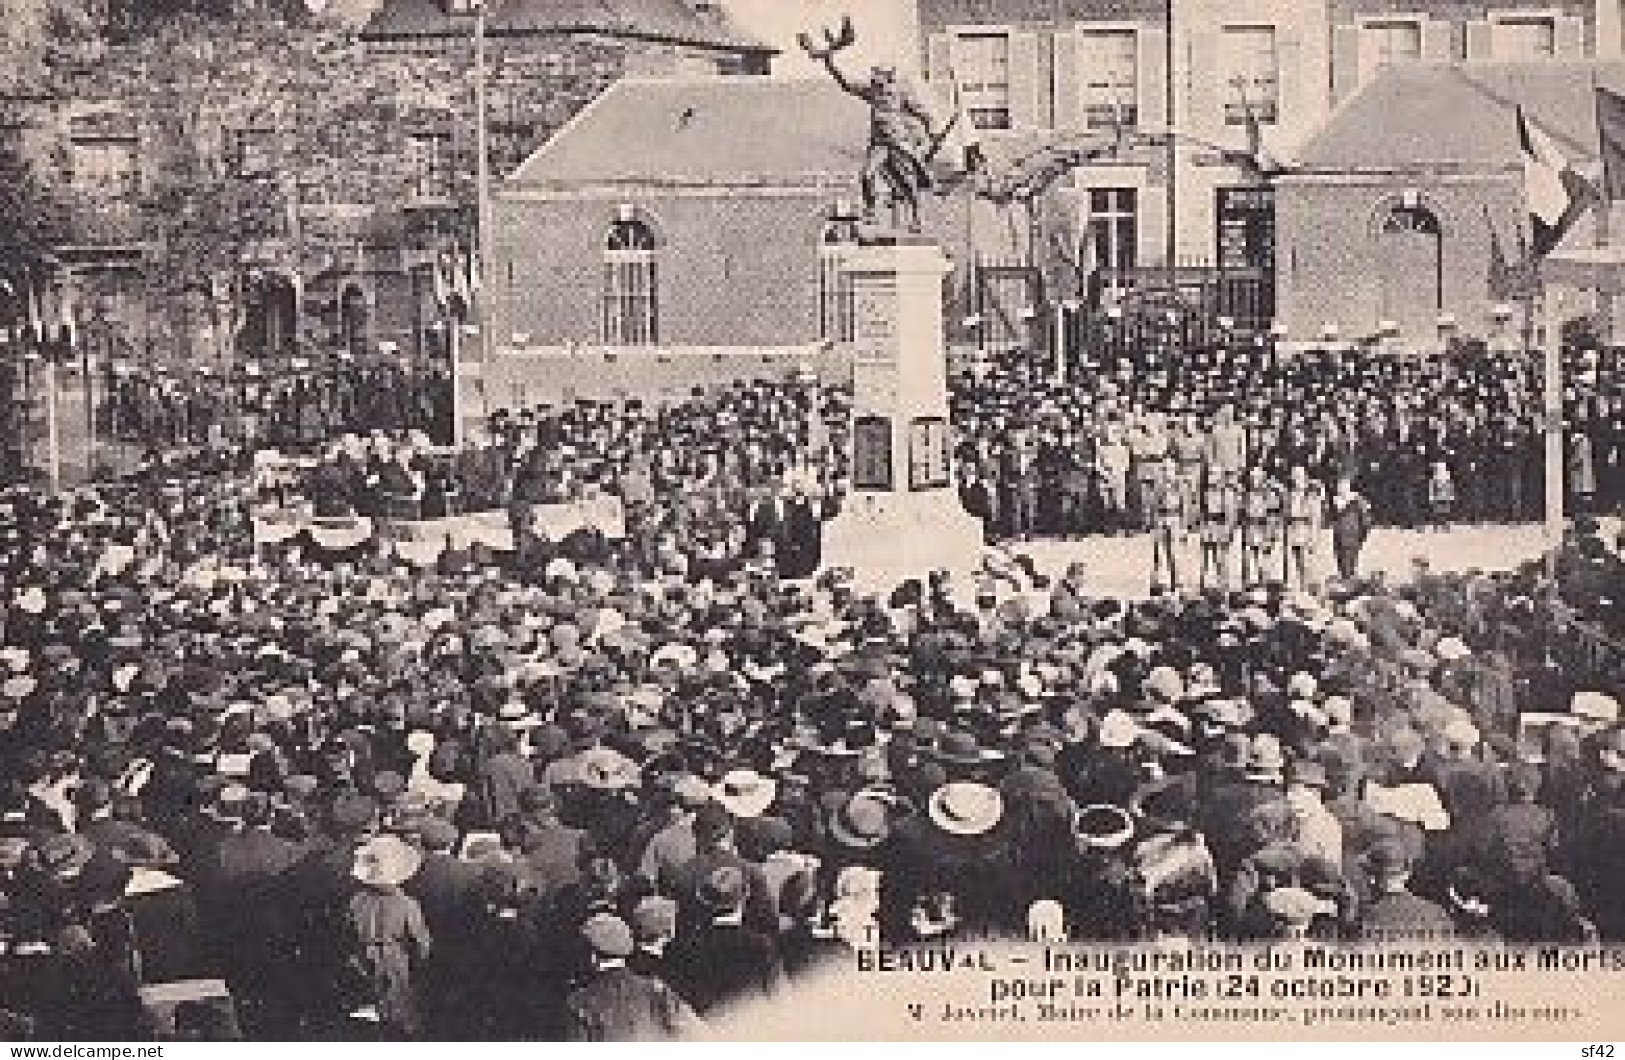 BEAUVAL                  INAUGURATION DU MONUMENT AUX MORTS    24 OCTOBRE 1920 - Beauval